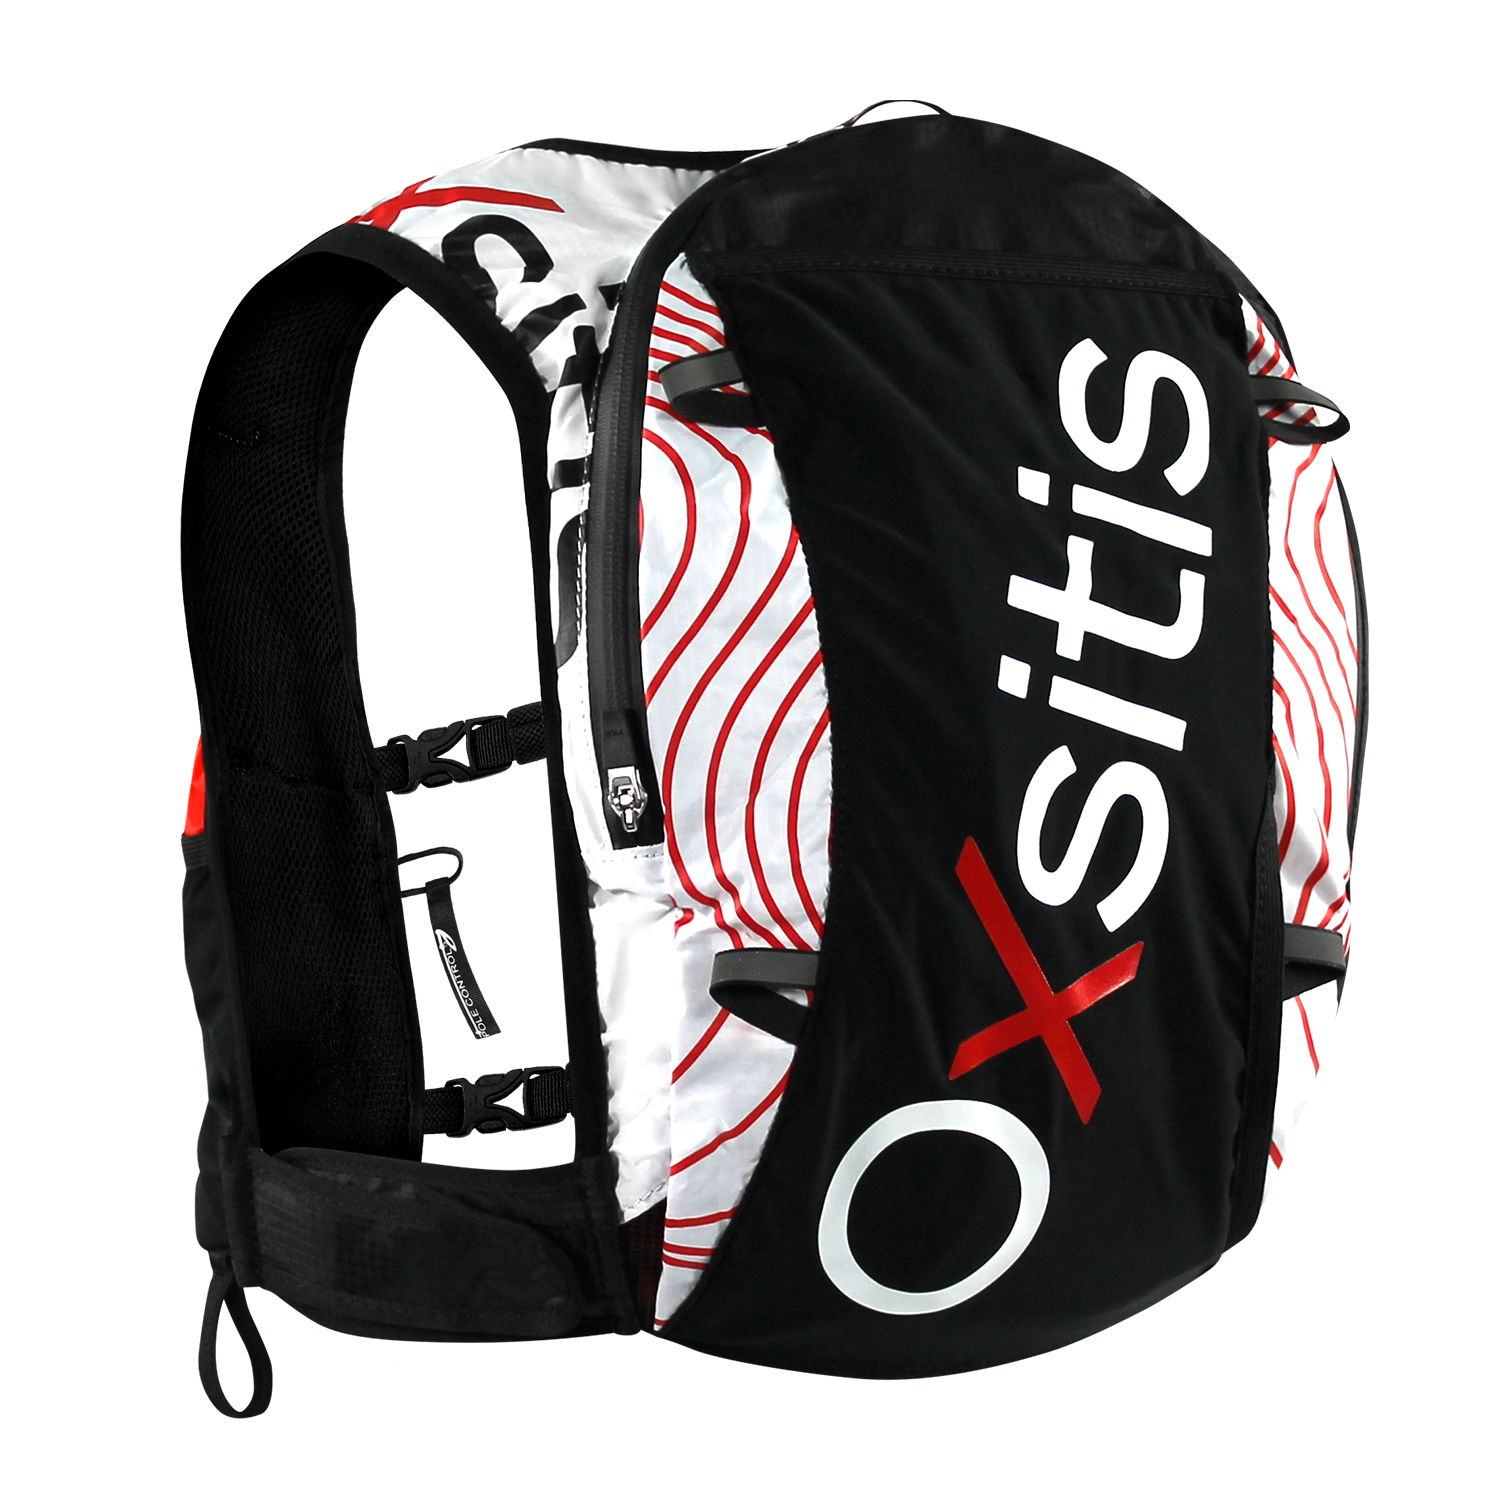 Oxsitis Pulse 12 - Trail running backpack